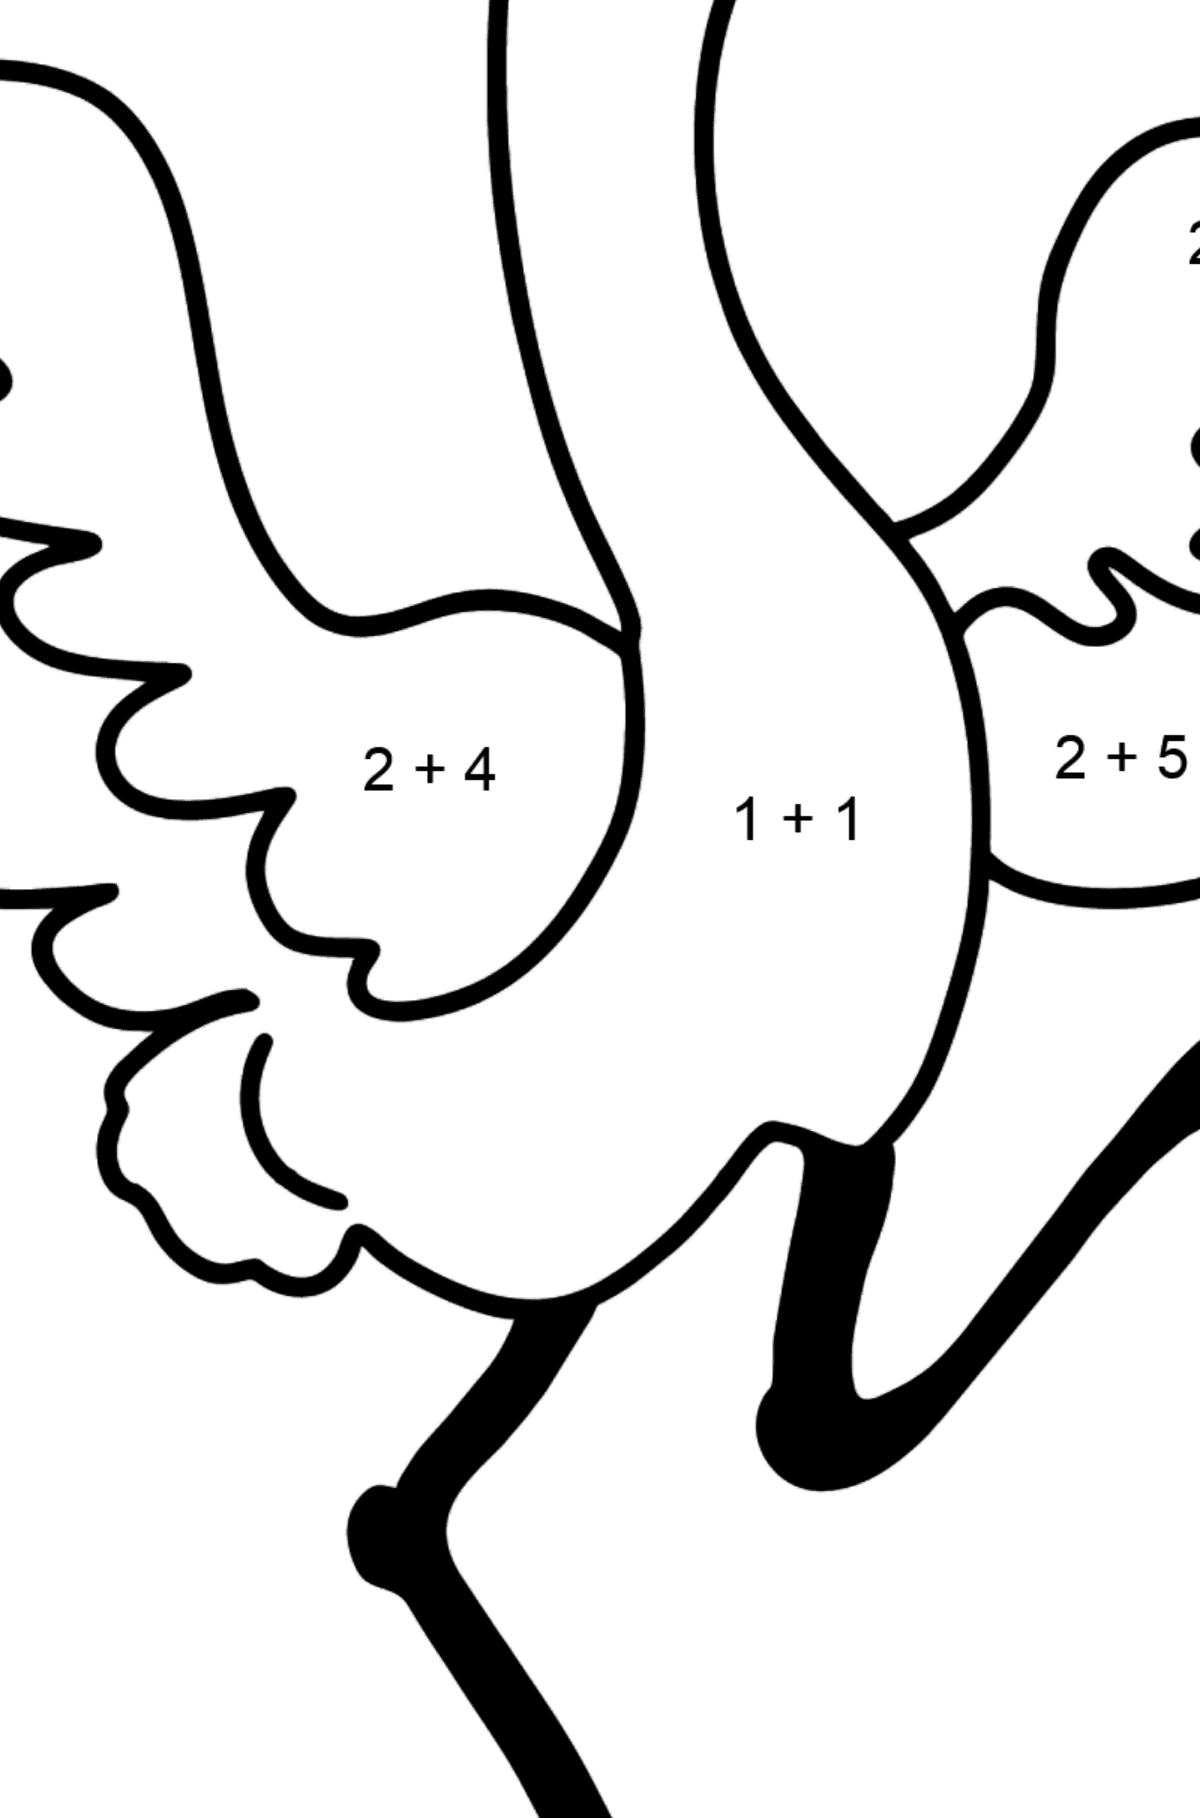 Crane coloring page - Math Coloring - Addition for Kids